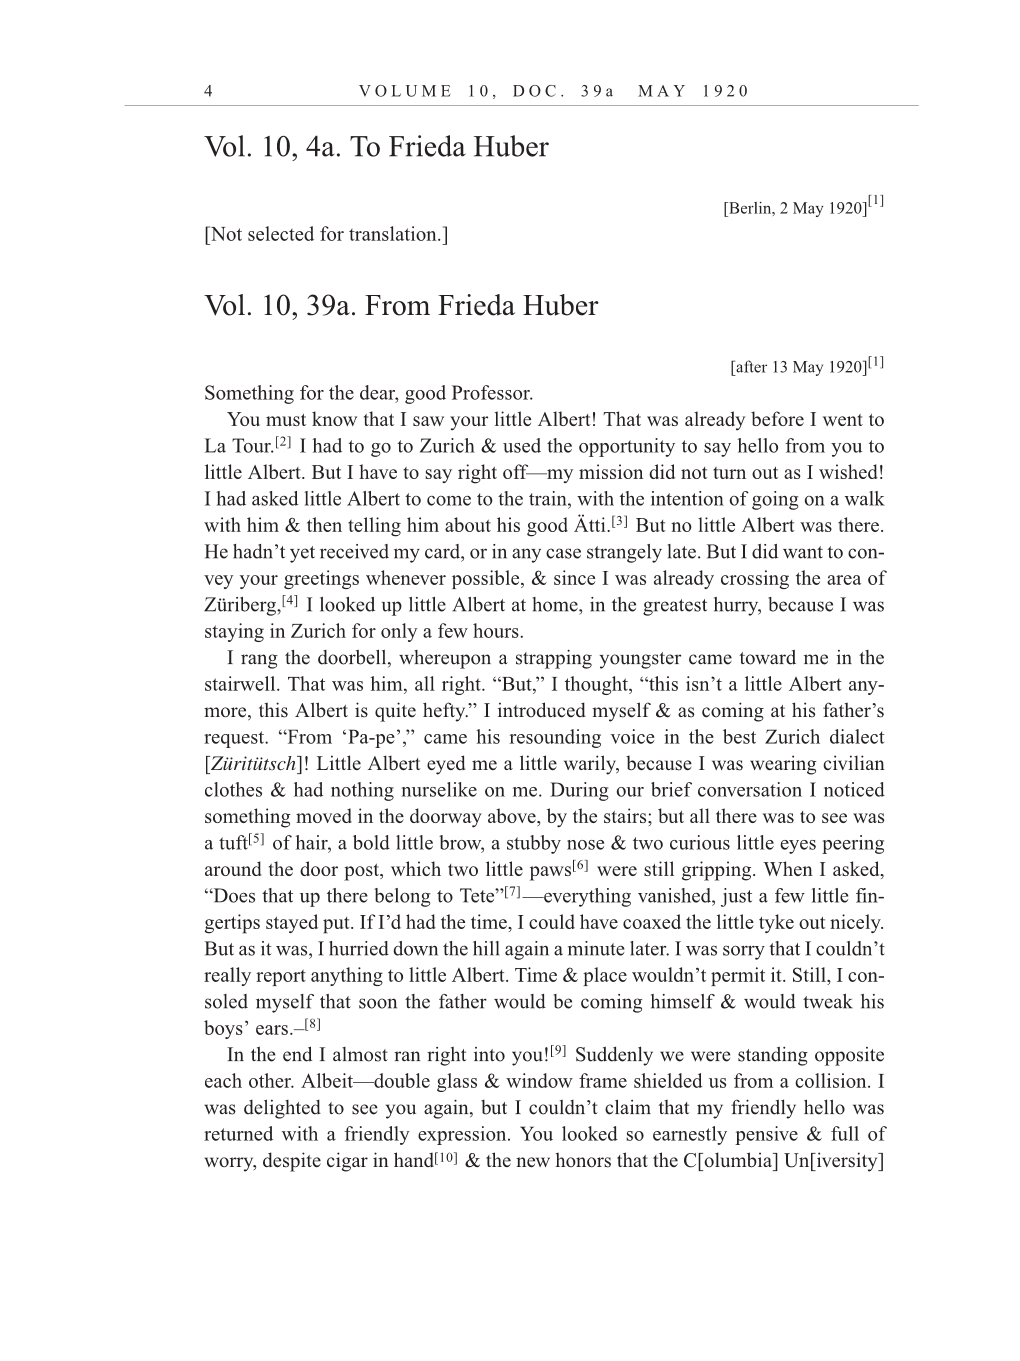 Volume 12: The Berlin Years: Correspondence, January-December 1921 (English translation supplement) page 4